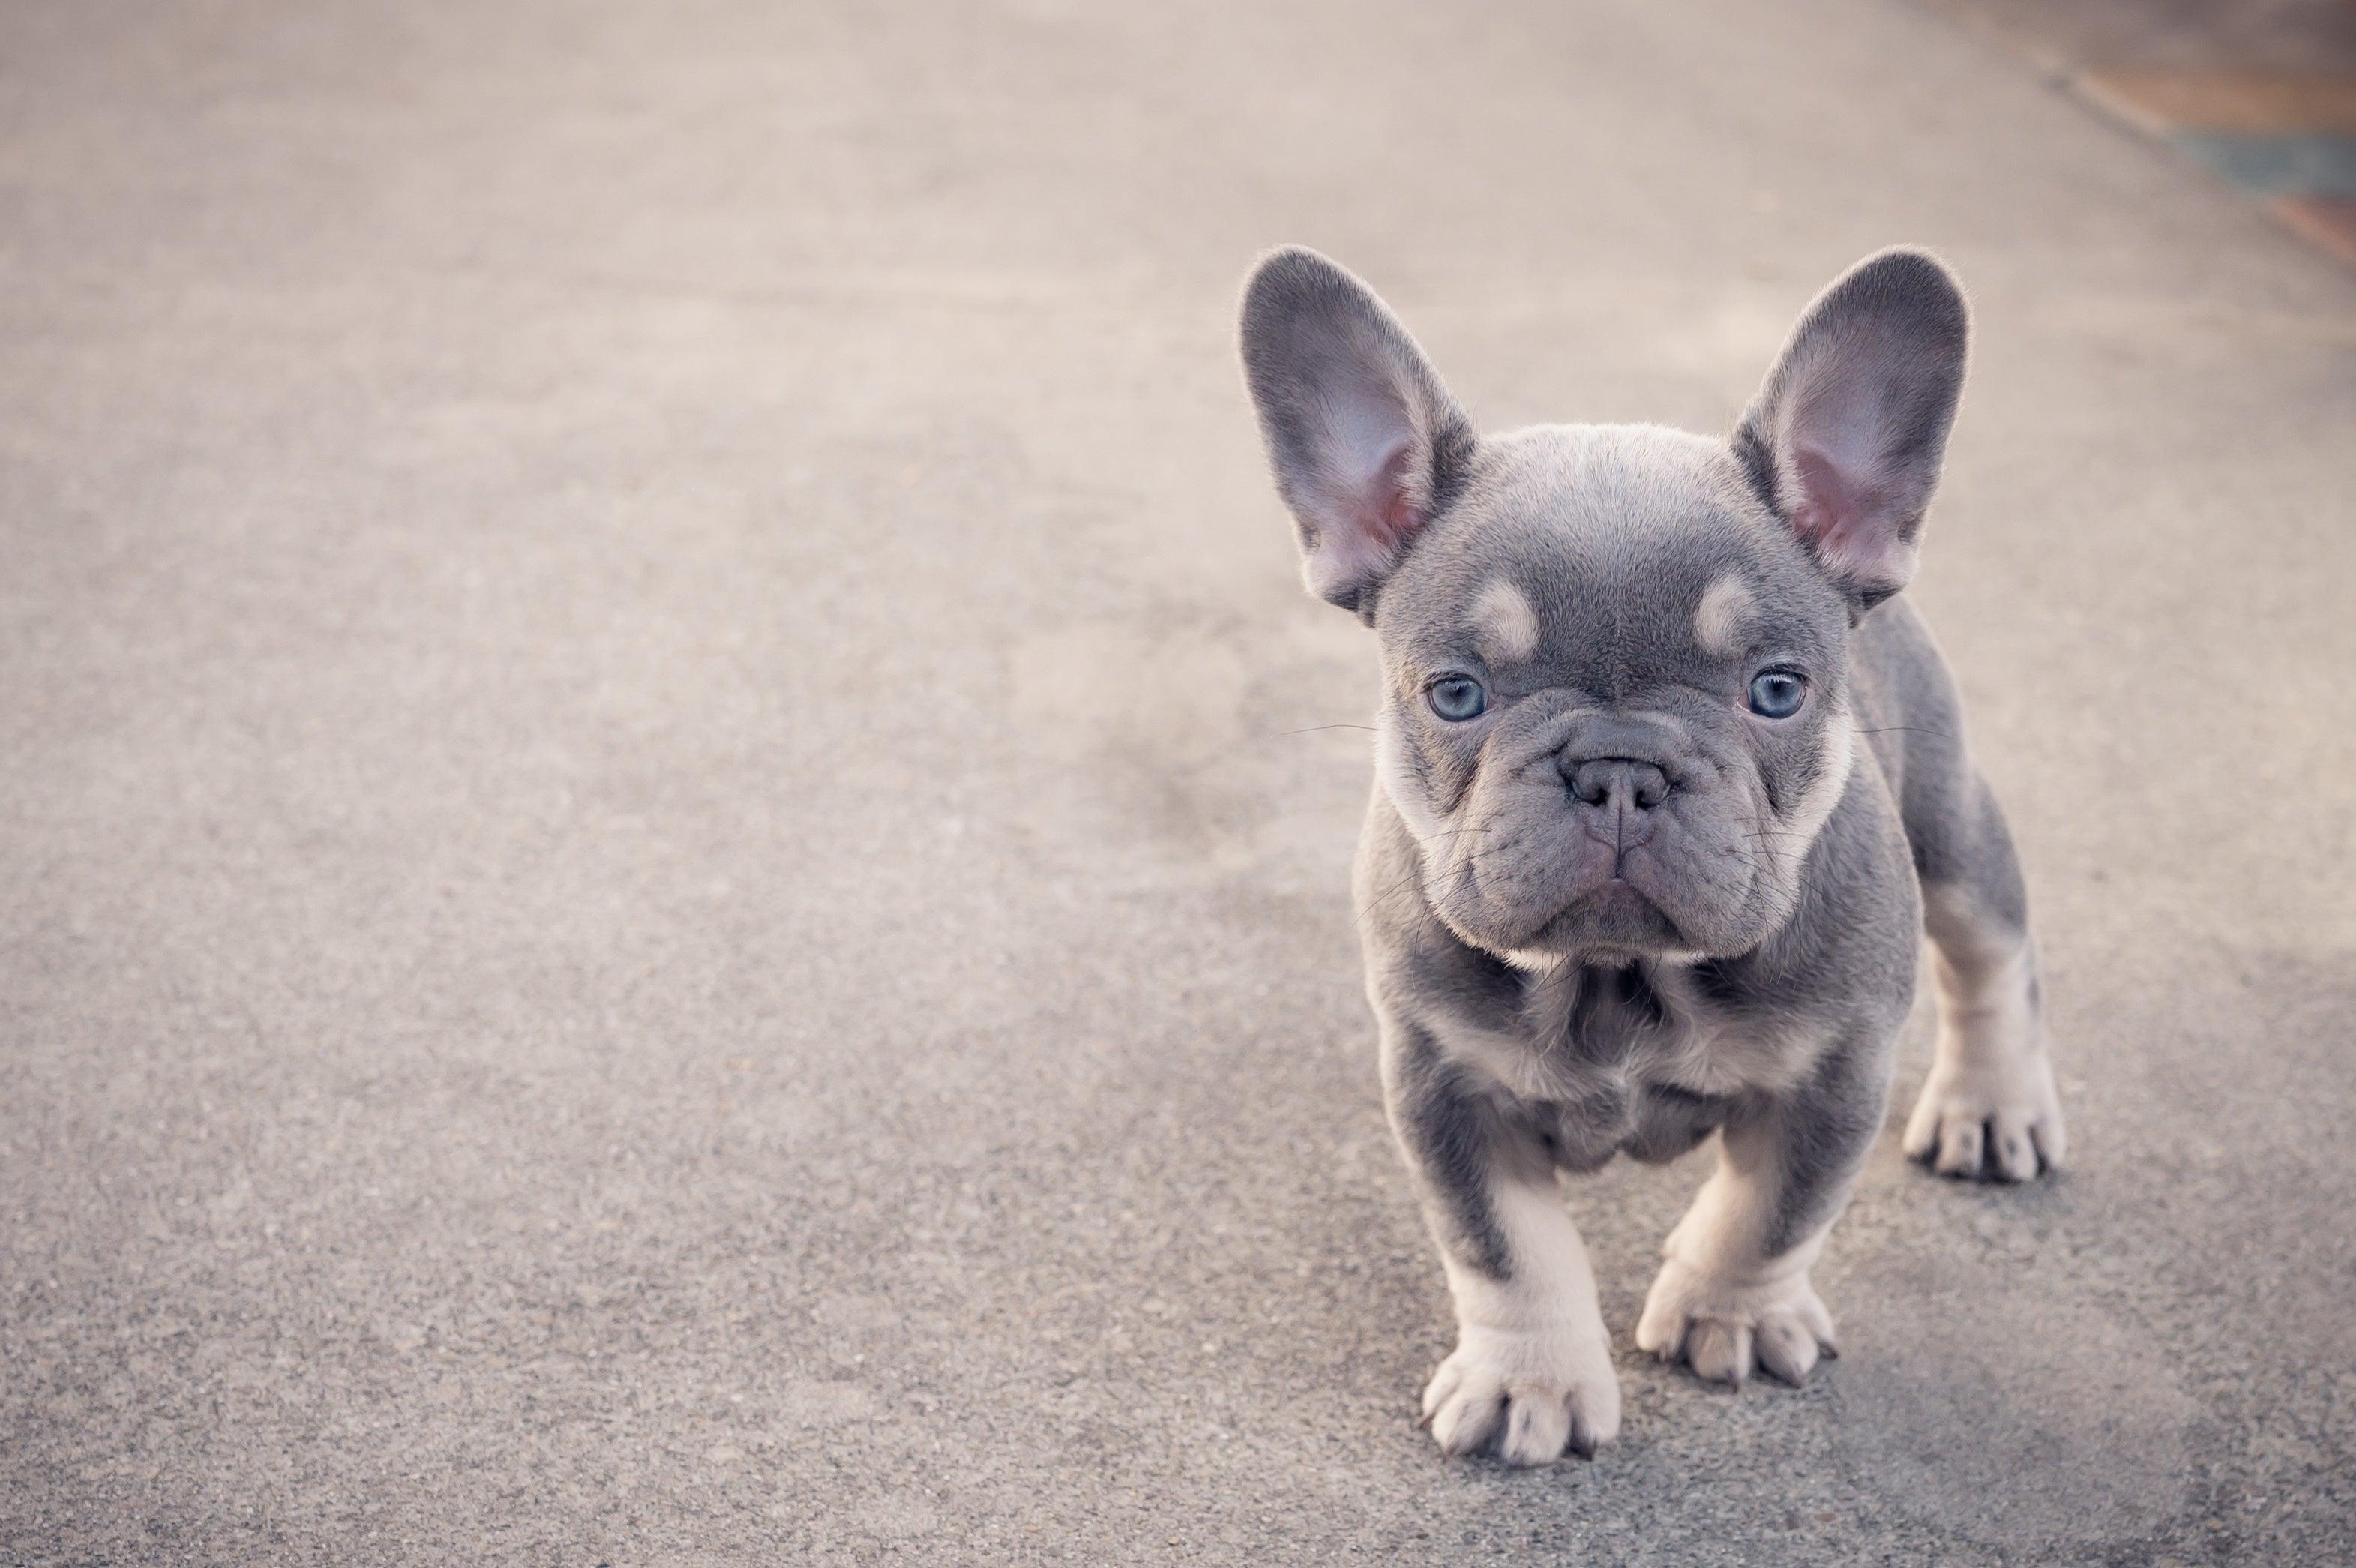 do french bulldogs help with anxiety?